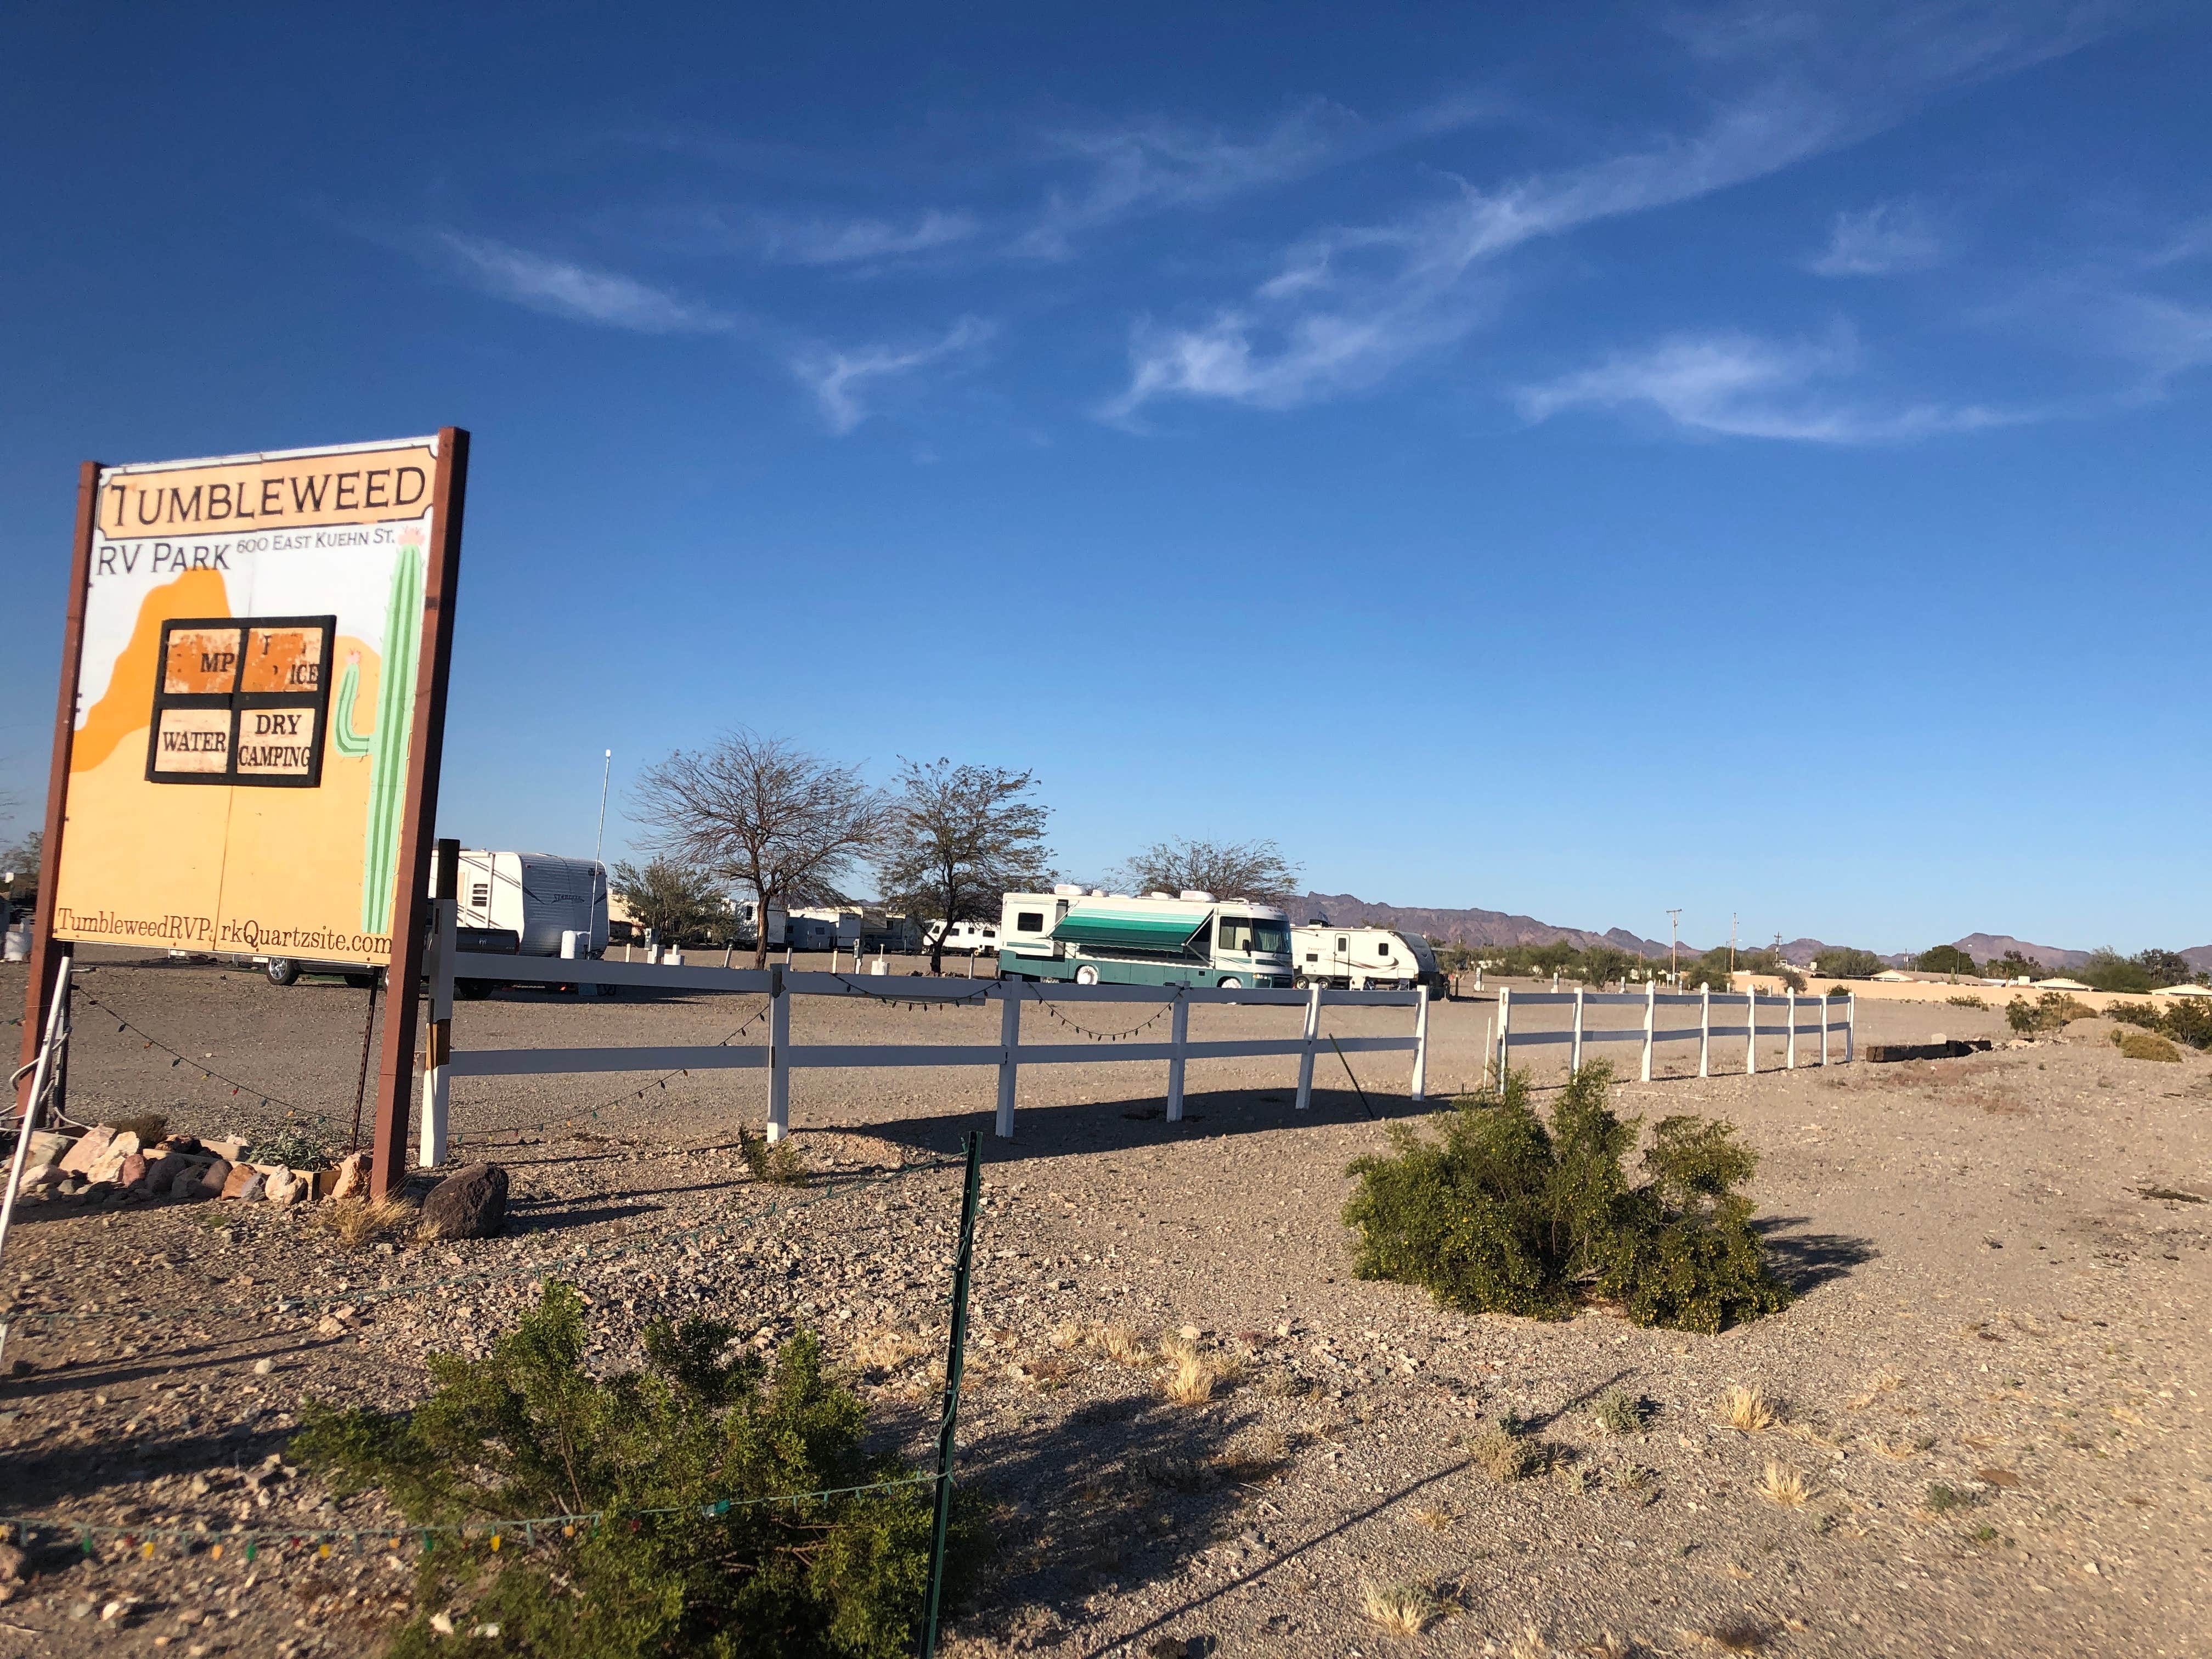 Camper submitted image from Tumbleweed RV Park - 4